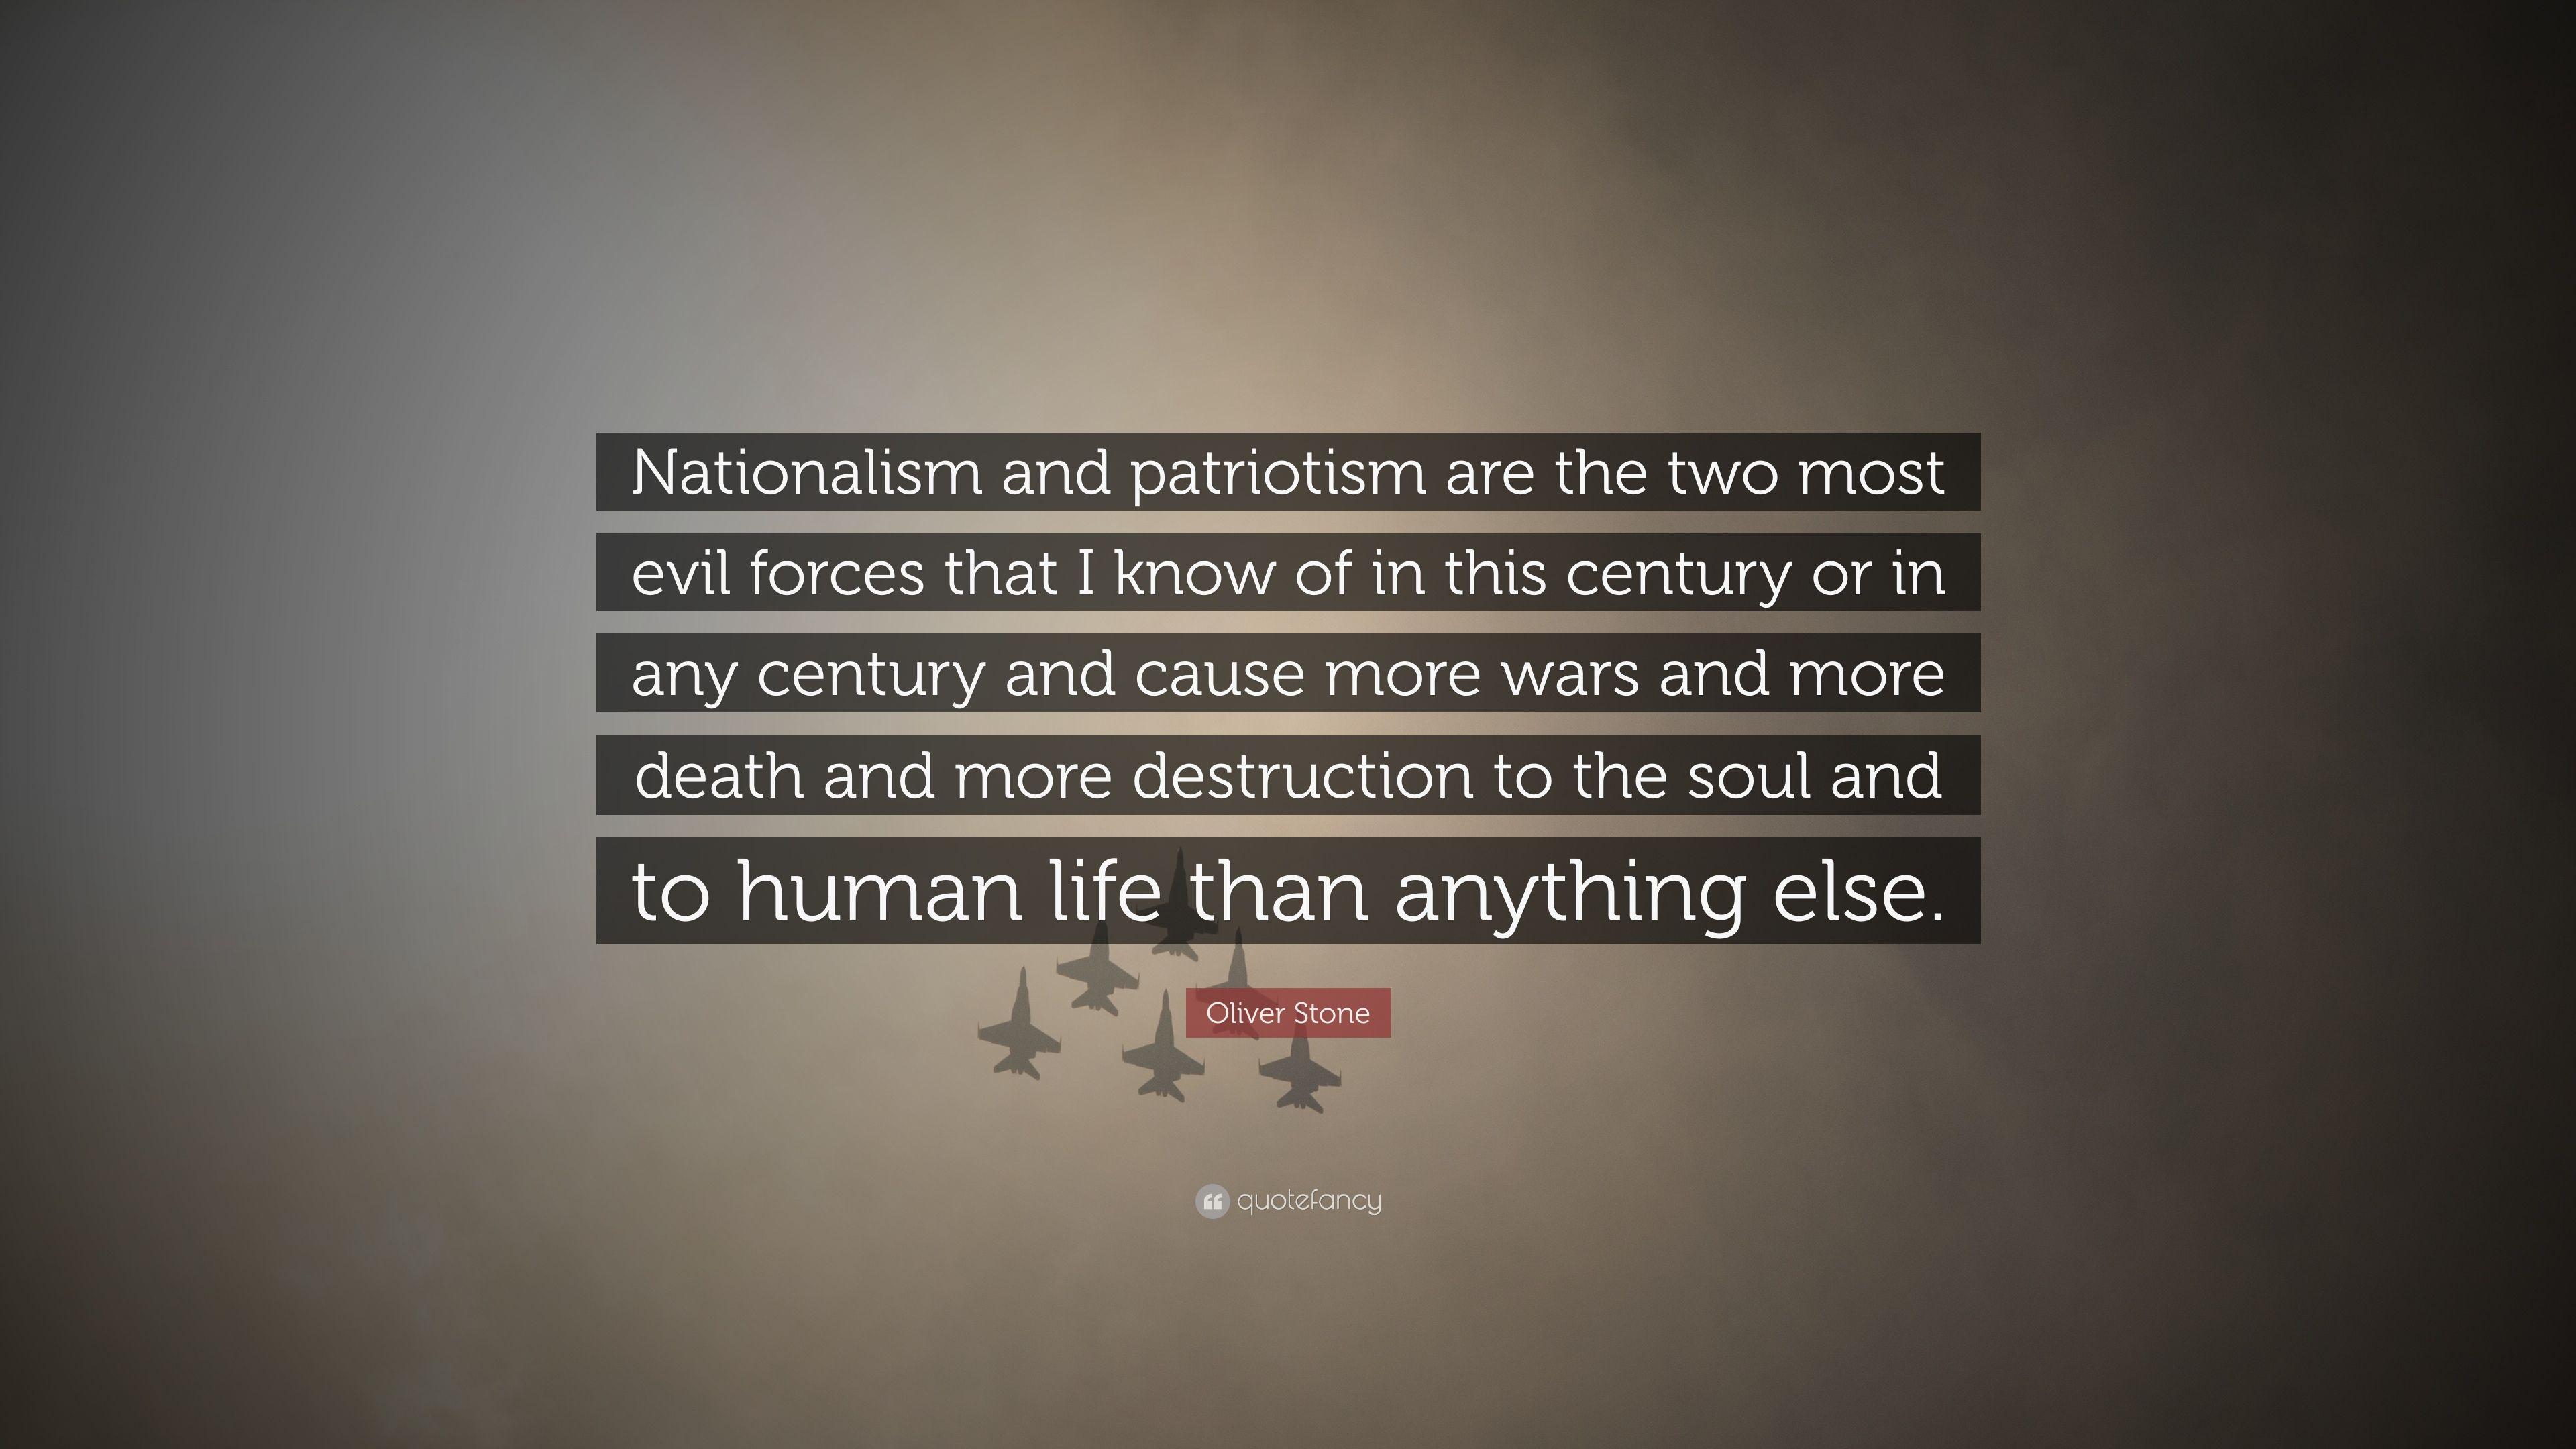 Oliver Stone Quote: “Nationalism and patriotism are the two most